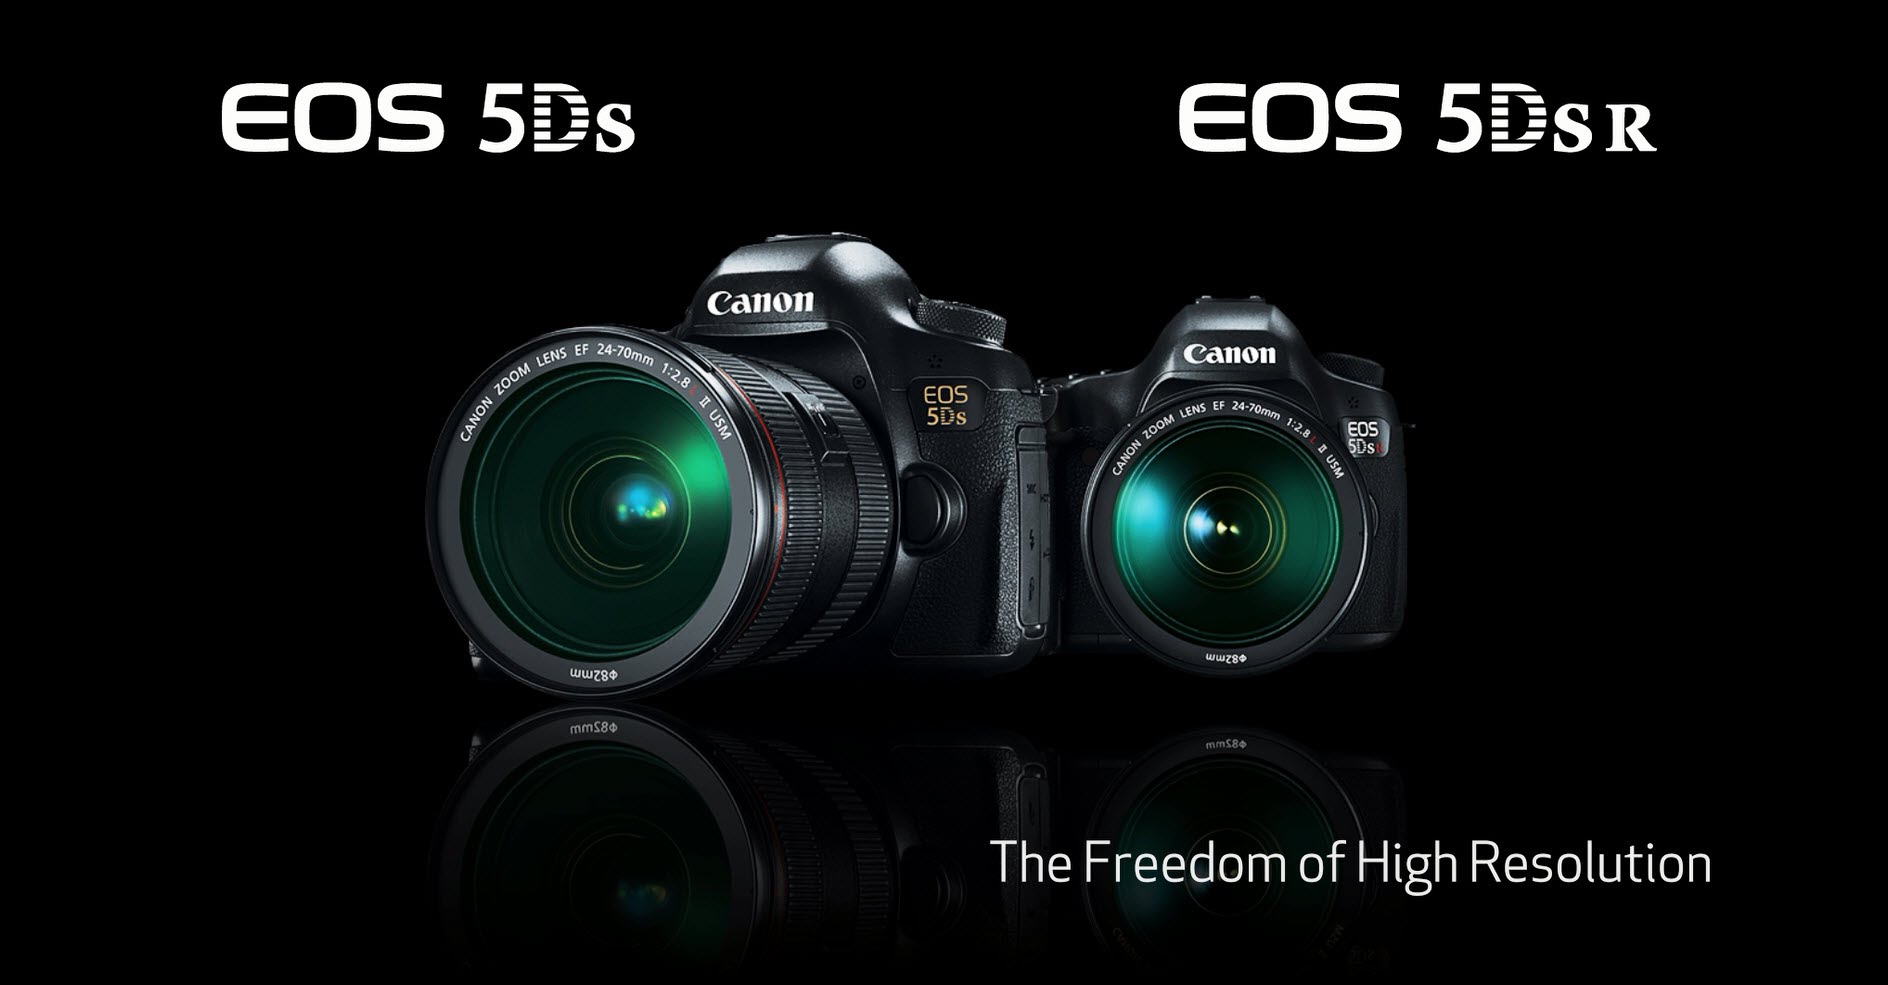 Canon EOS 5DS and 5DS R DSLR Cameras – The Freedom of High Resolution